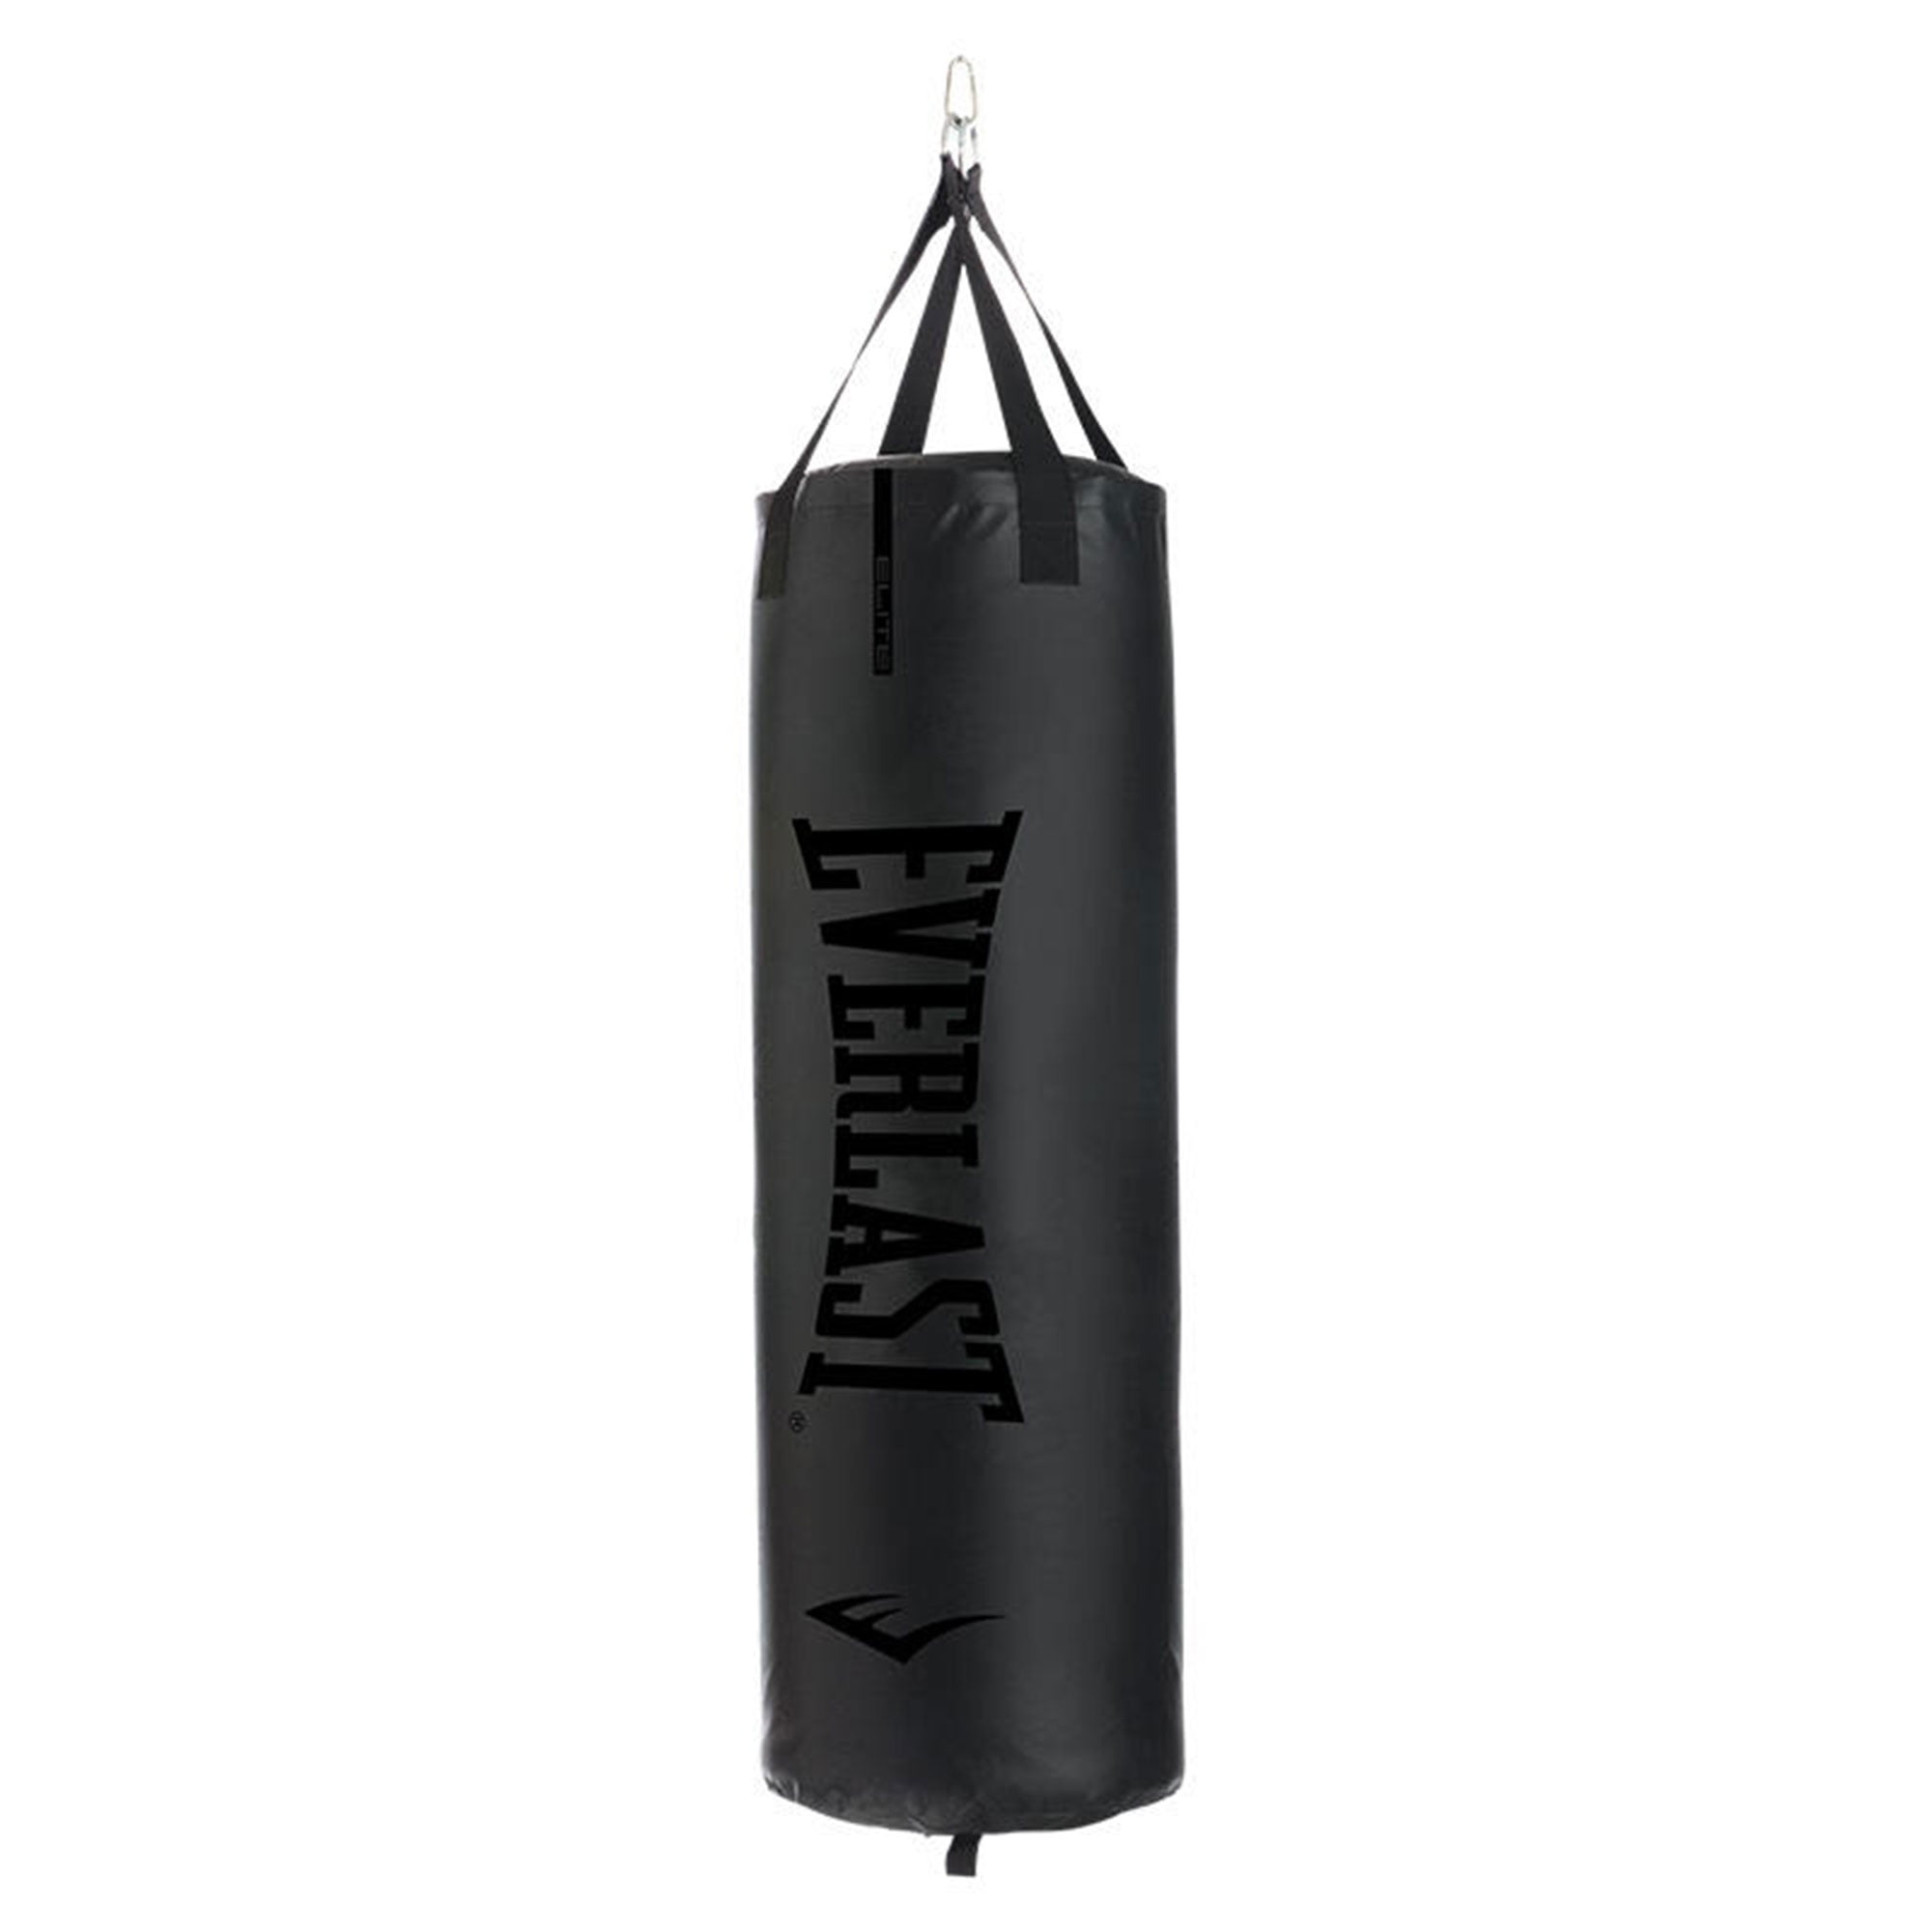 How to fill an Everlast heavy bag base with SAND! 